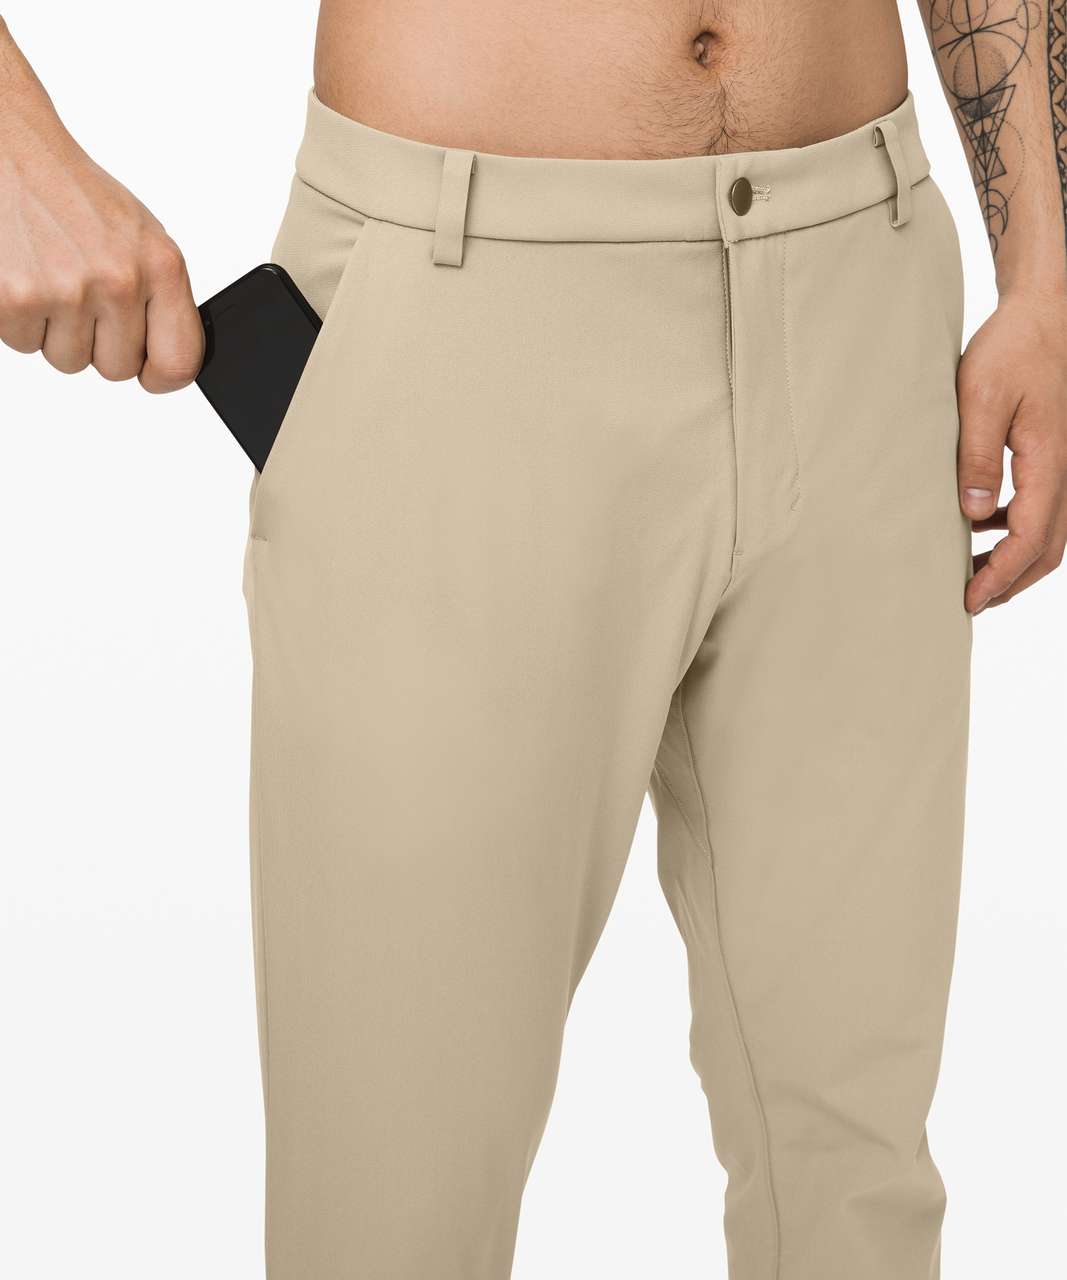 Lululemon Commission Pant Classic *Warpstreme 32" - Tofino Sand (First Release)